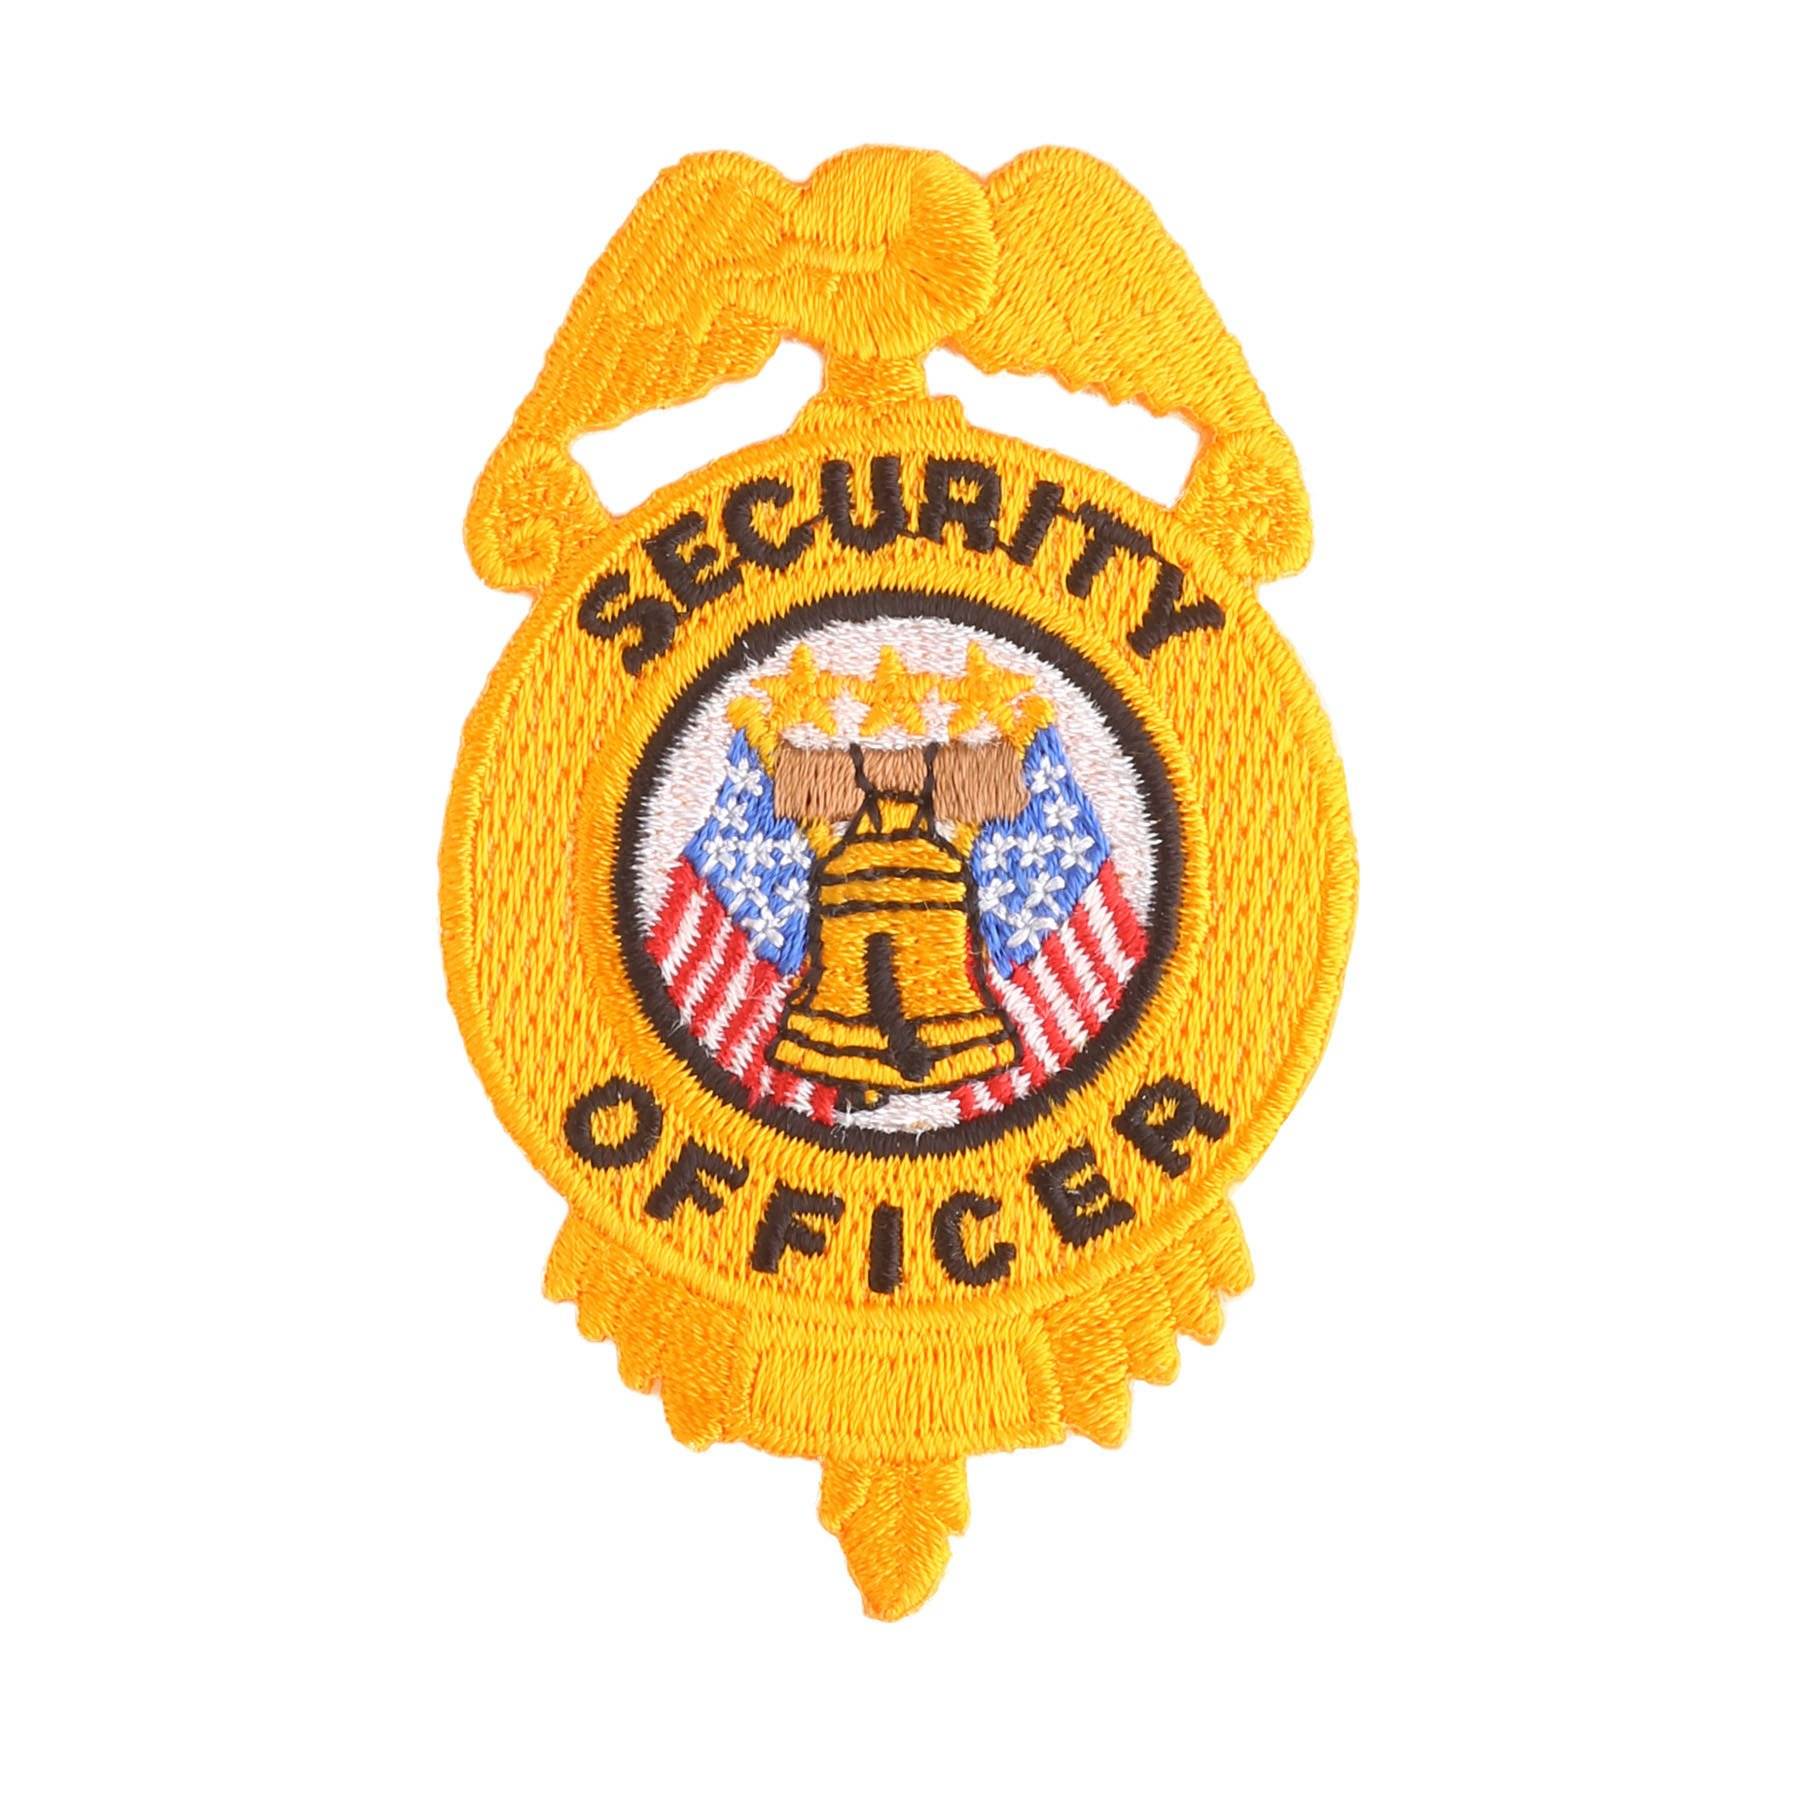 PROTECTION OFFICER embroidery patches 4x10 sew on blk/gold 